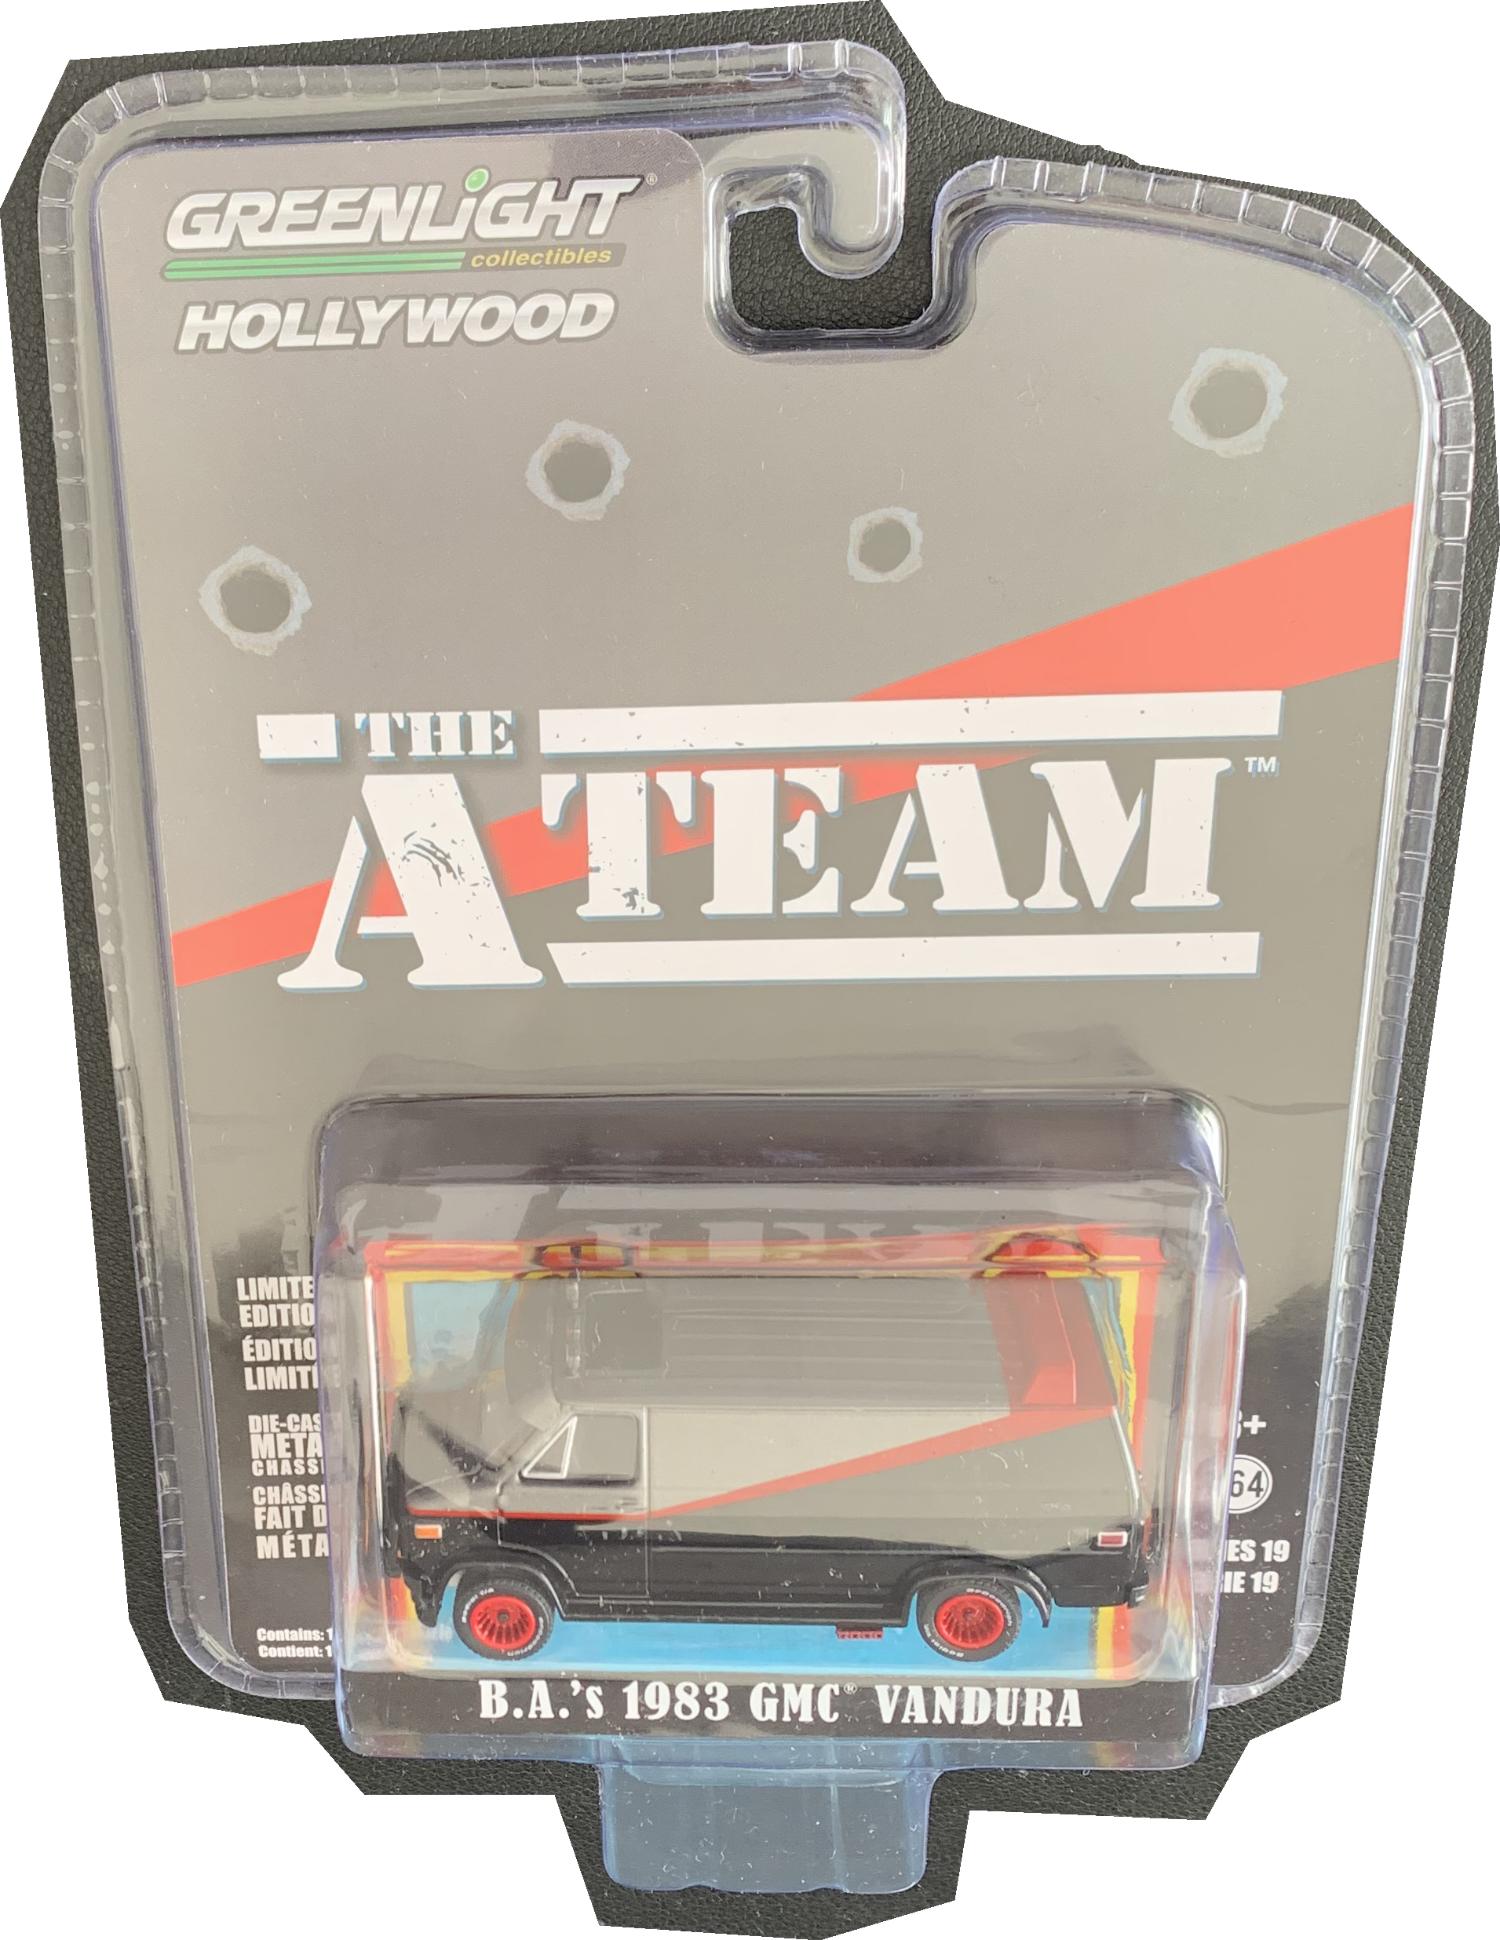 The A Team B.A’S 1983 GMC Vandura 1:64 scale model from Greenlight, limited edition